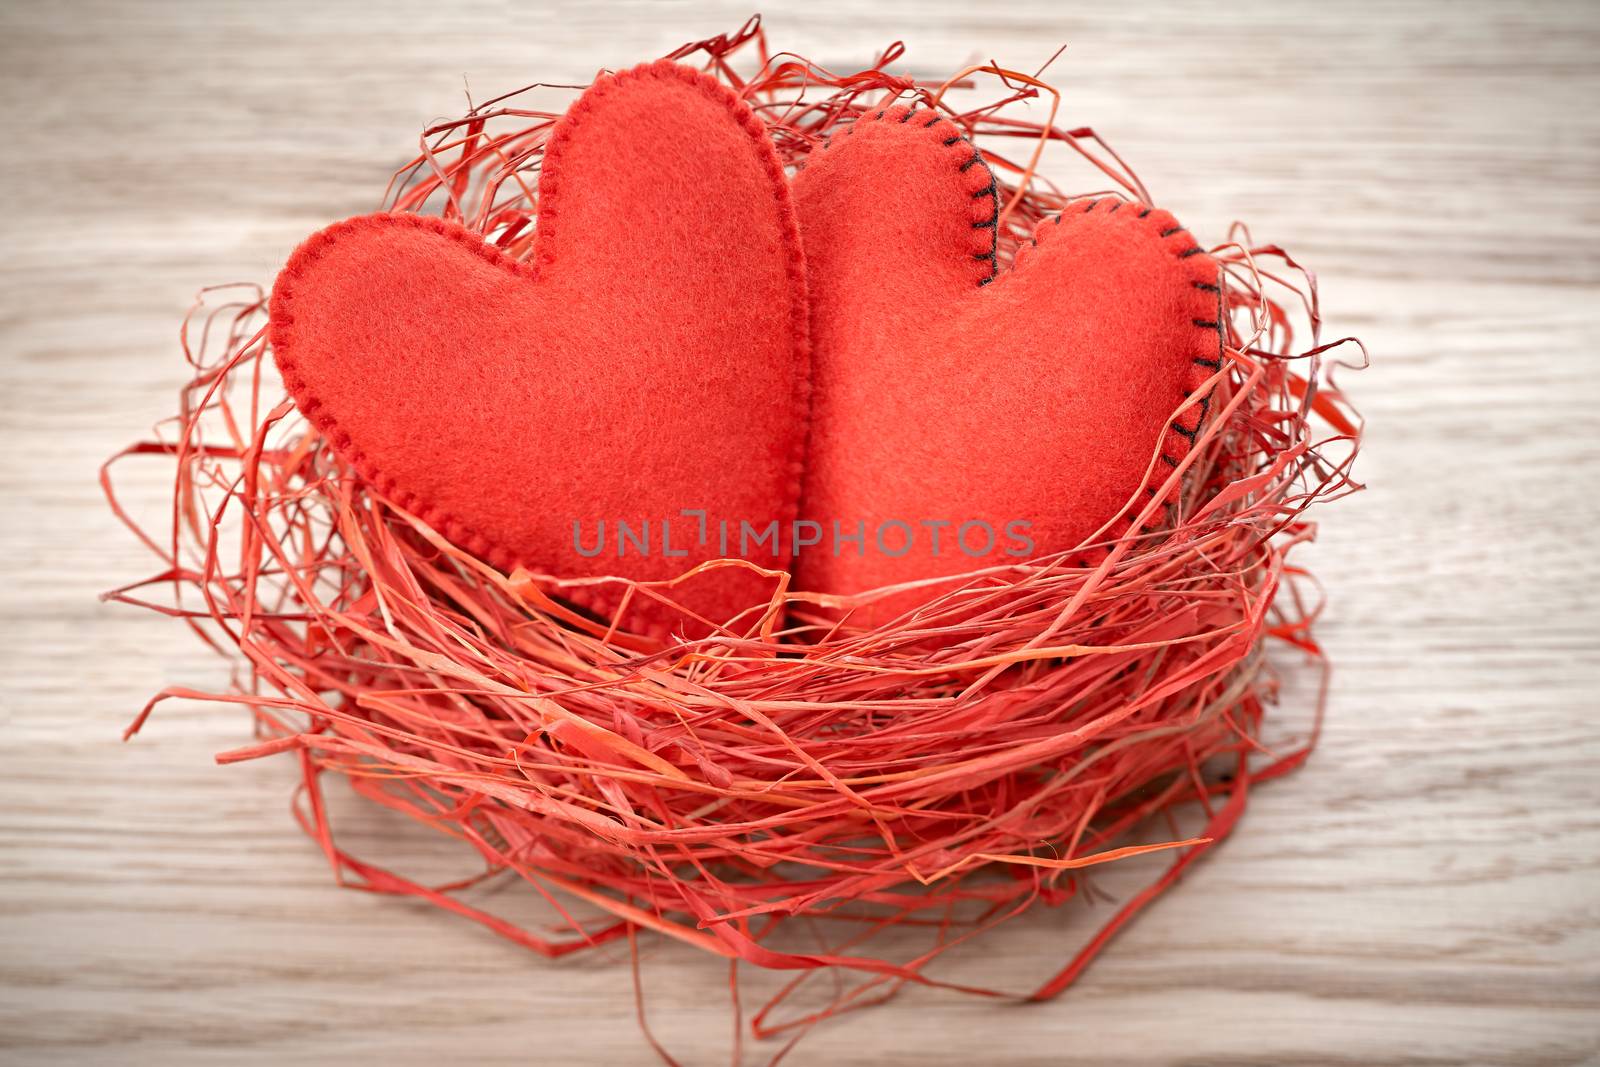 Love hearts, Valentines Day. Hearts handmade on wooden background. Couple made of red felt in straw nest. Vintage romantic style. Vivid greeting card.  